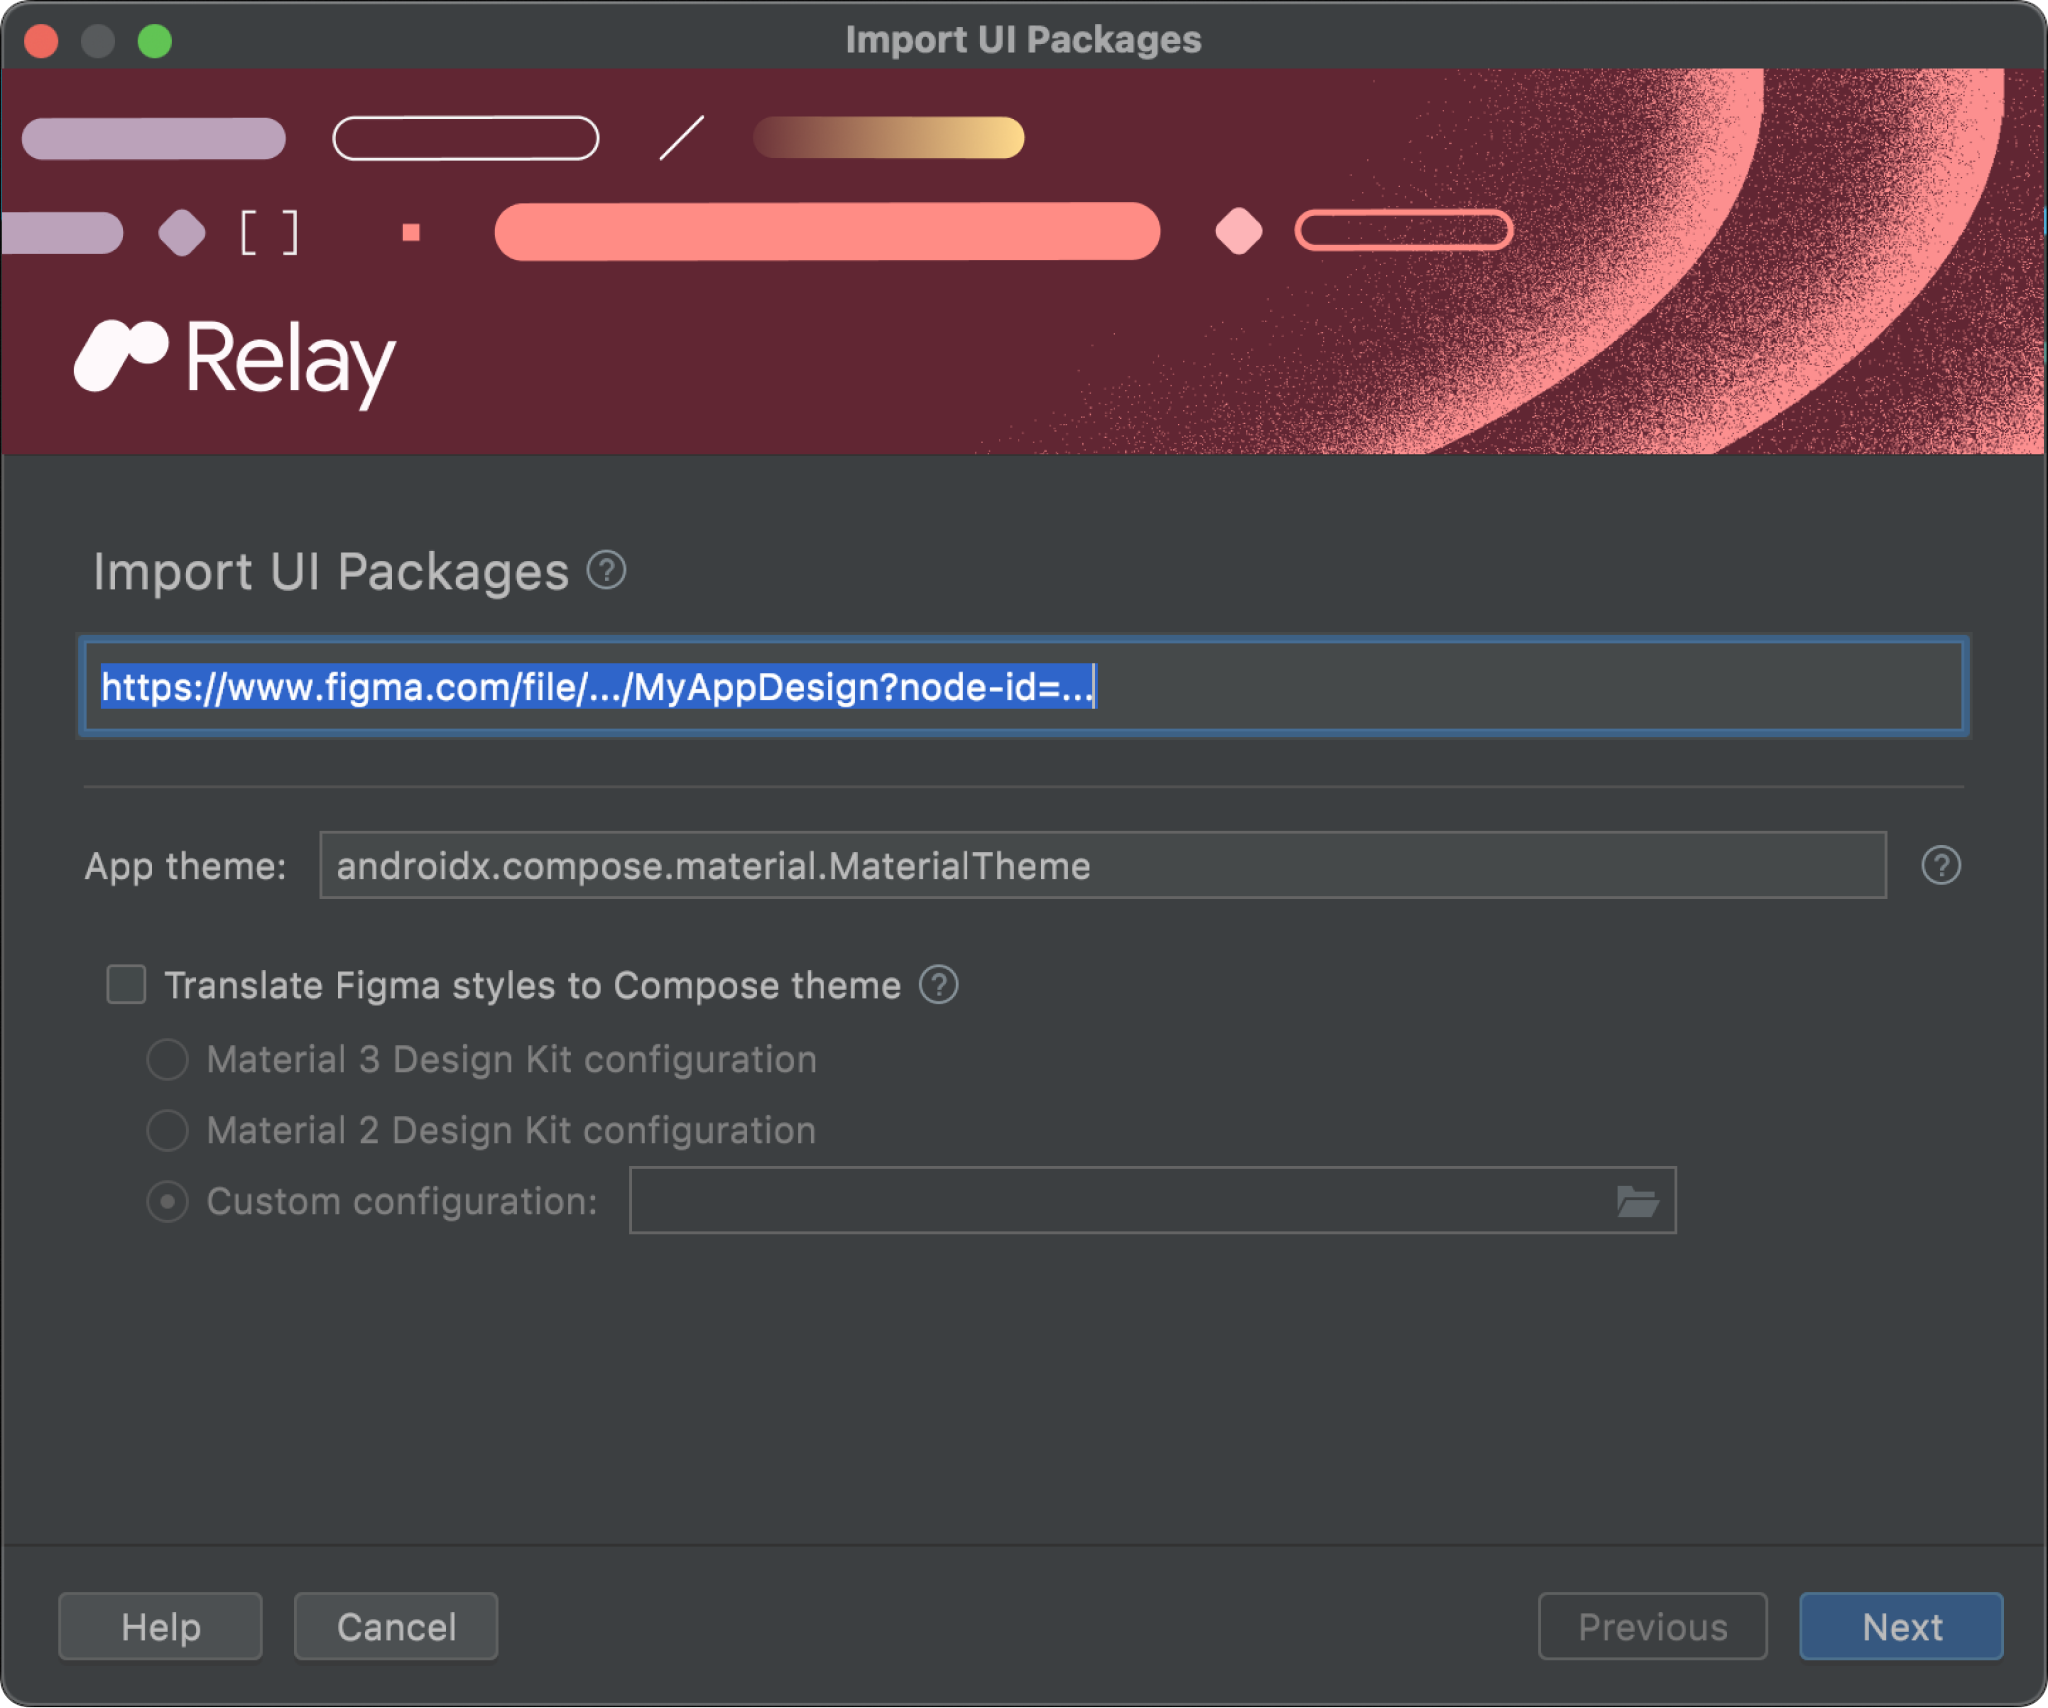 Relay for Android Studio プラグイン - [Import UI Packages] ダイアログ